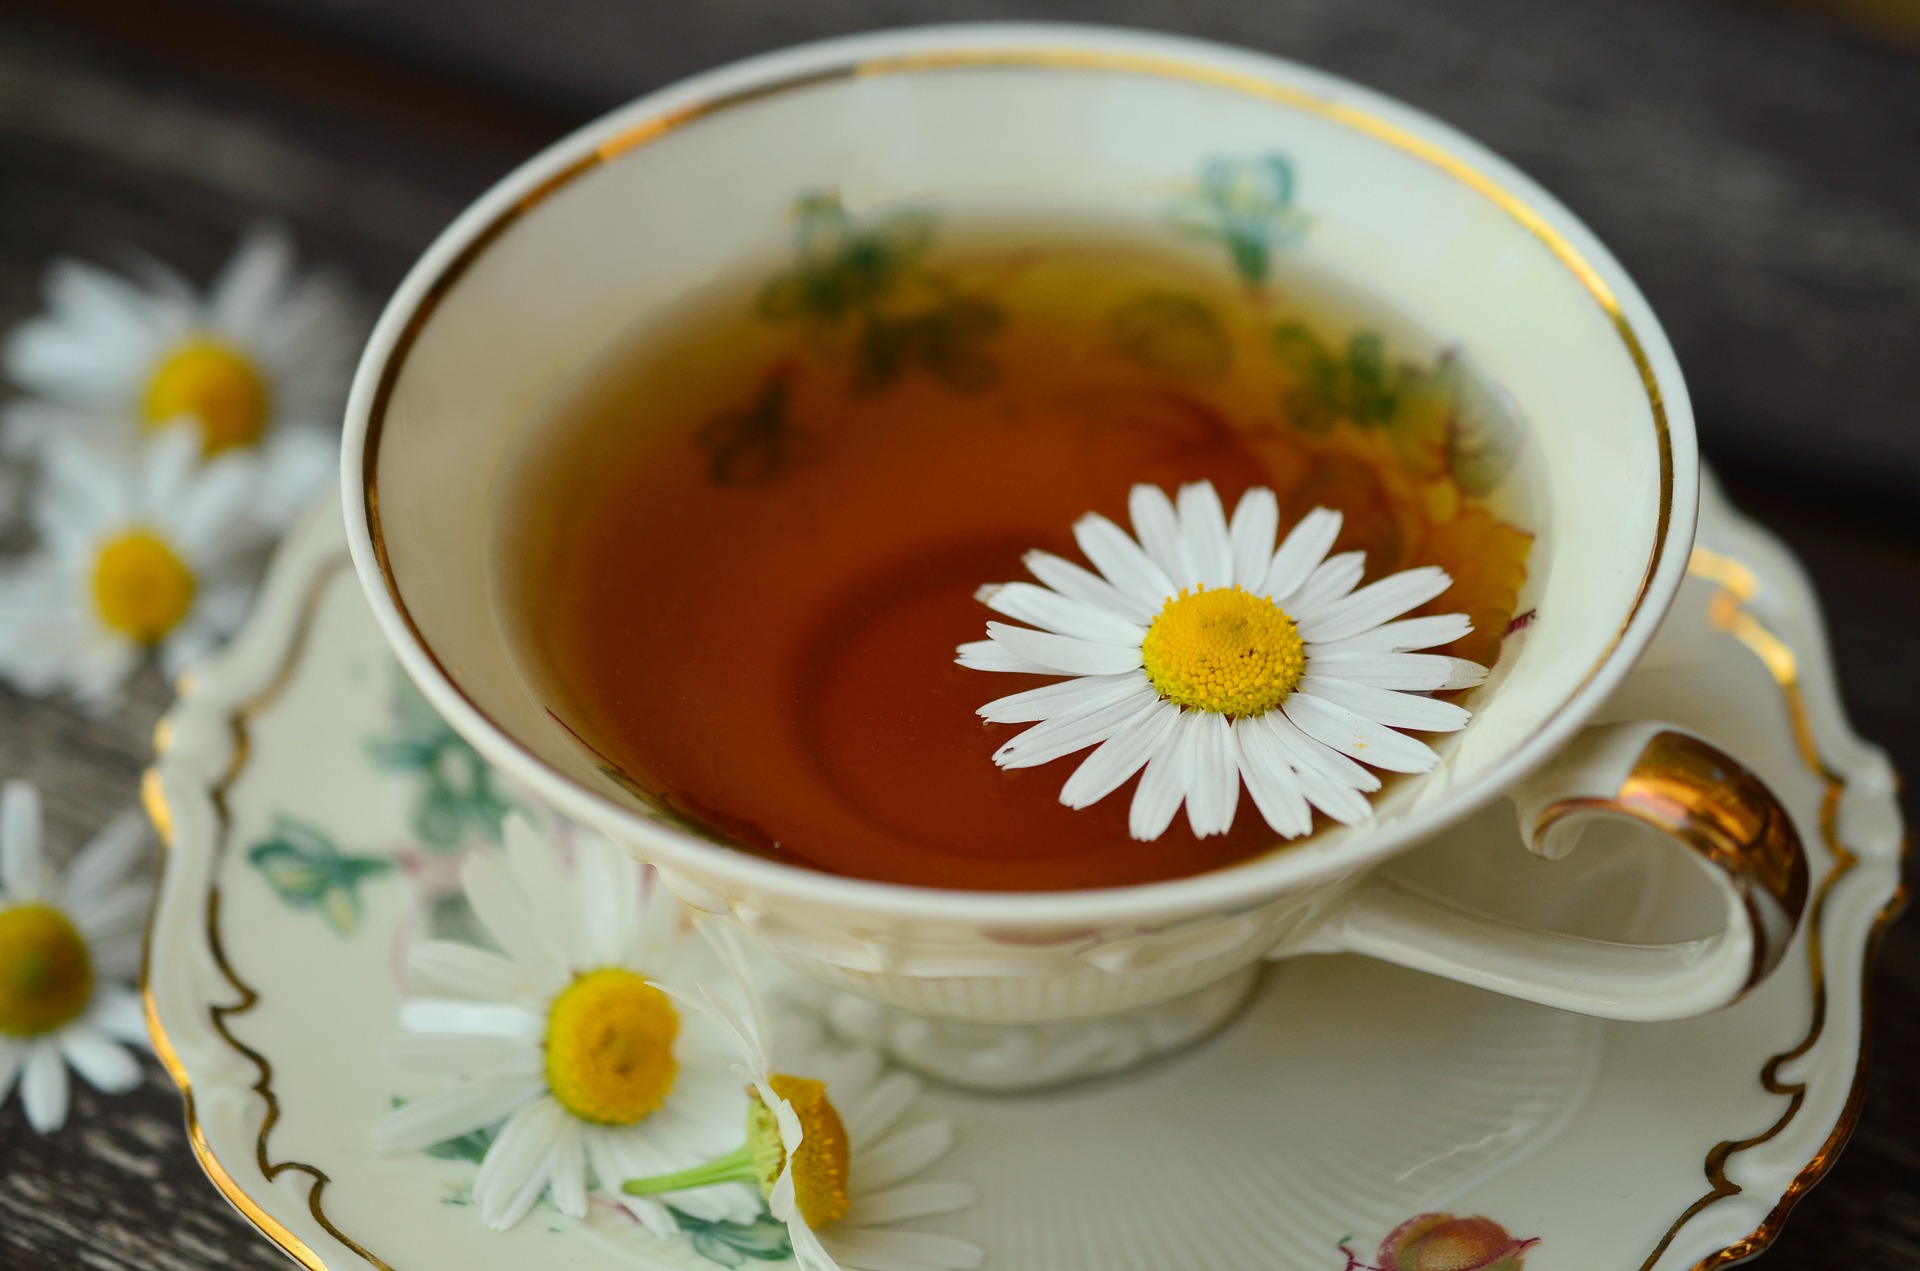 A cup of chamomile tea might help.